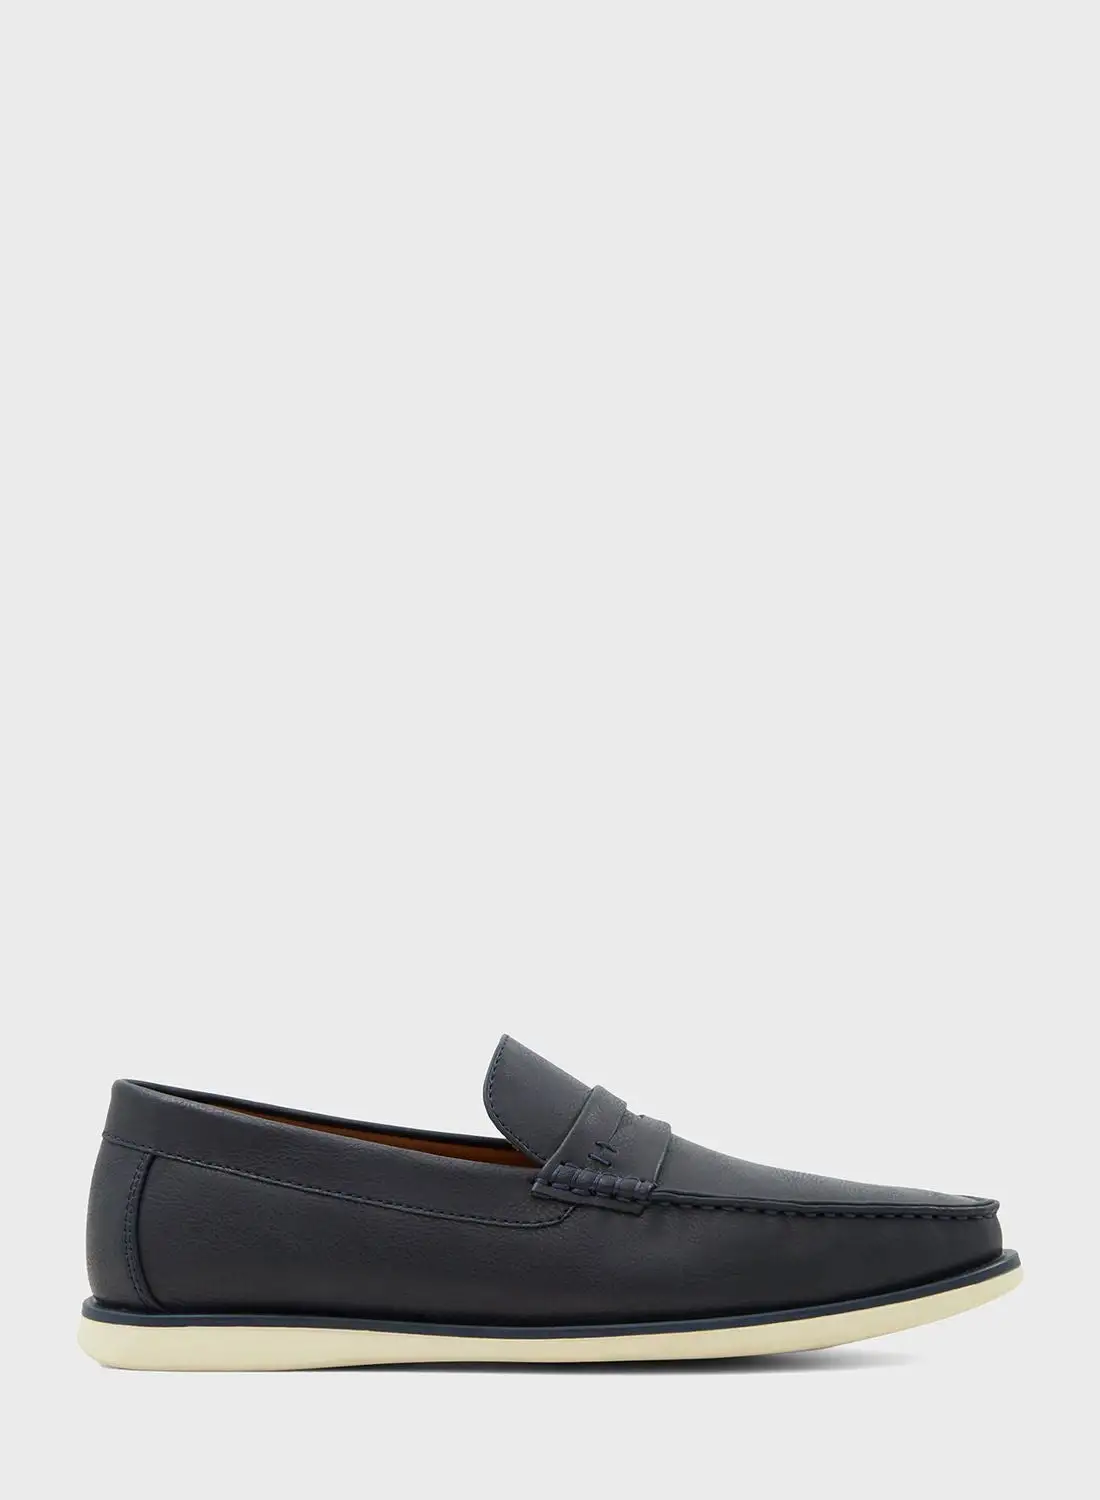 CALL IT SPRING Casual Slip On Loafers